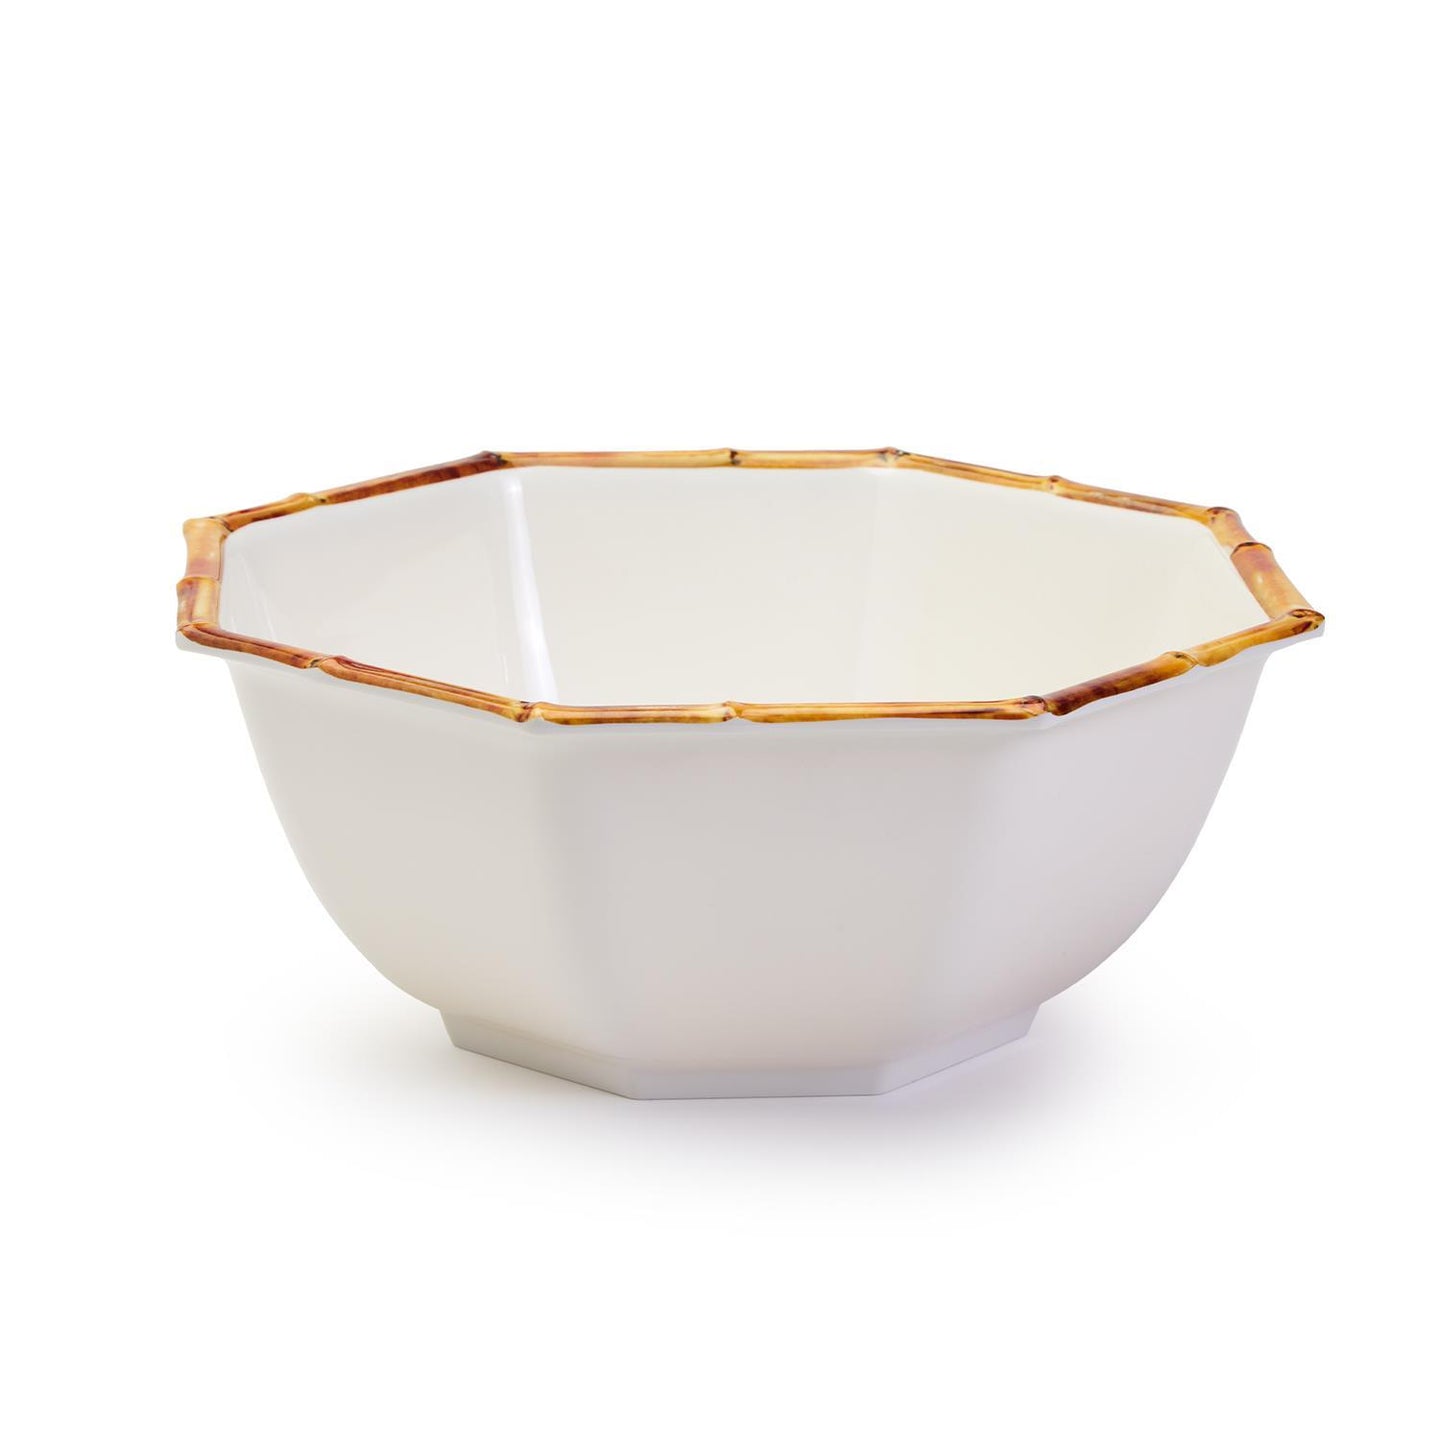 Two's Company Bamboo Octagonal Serving Bowl